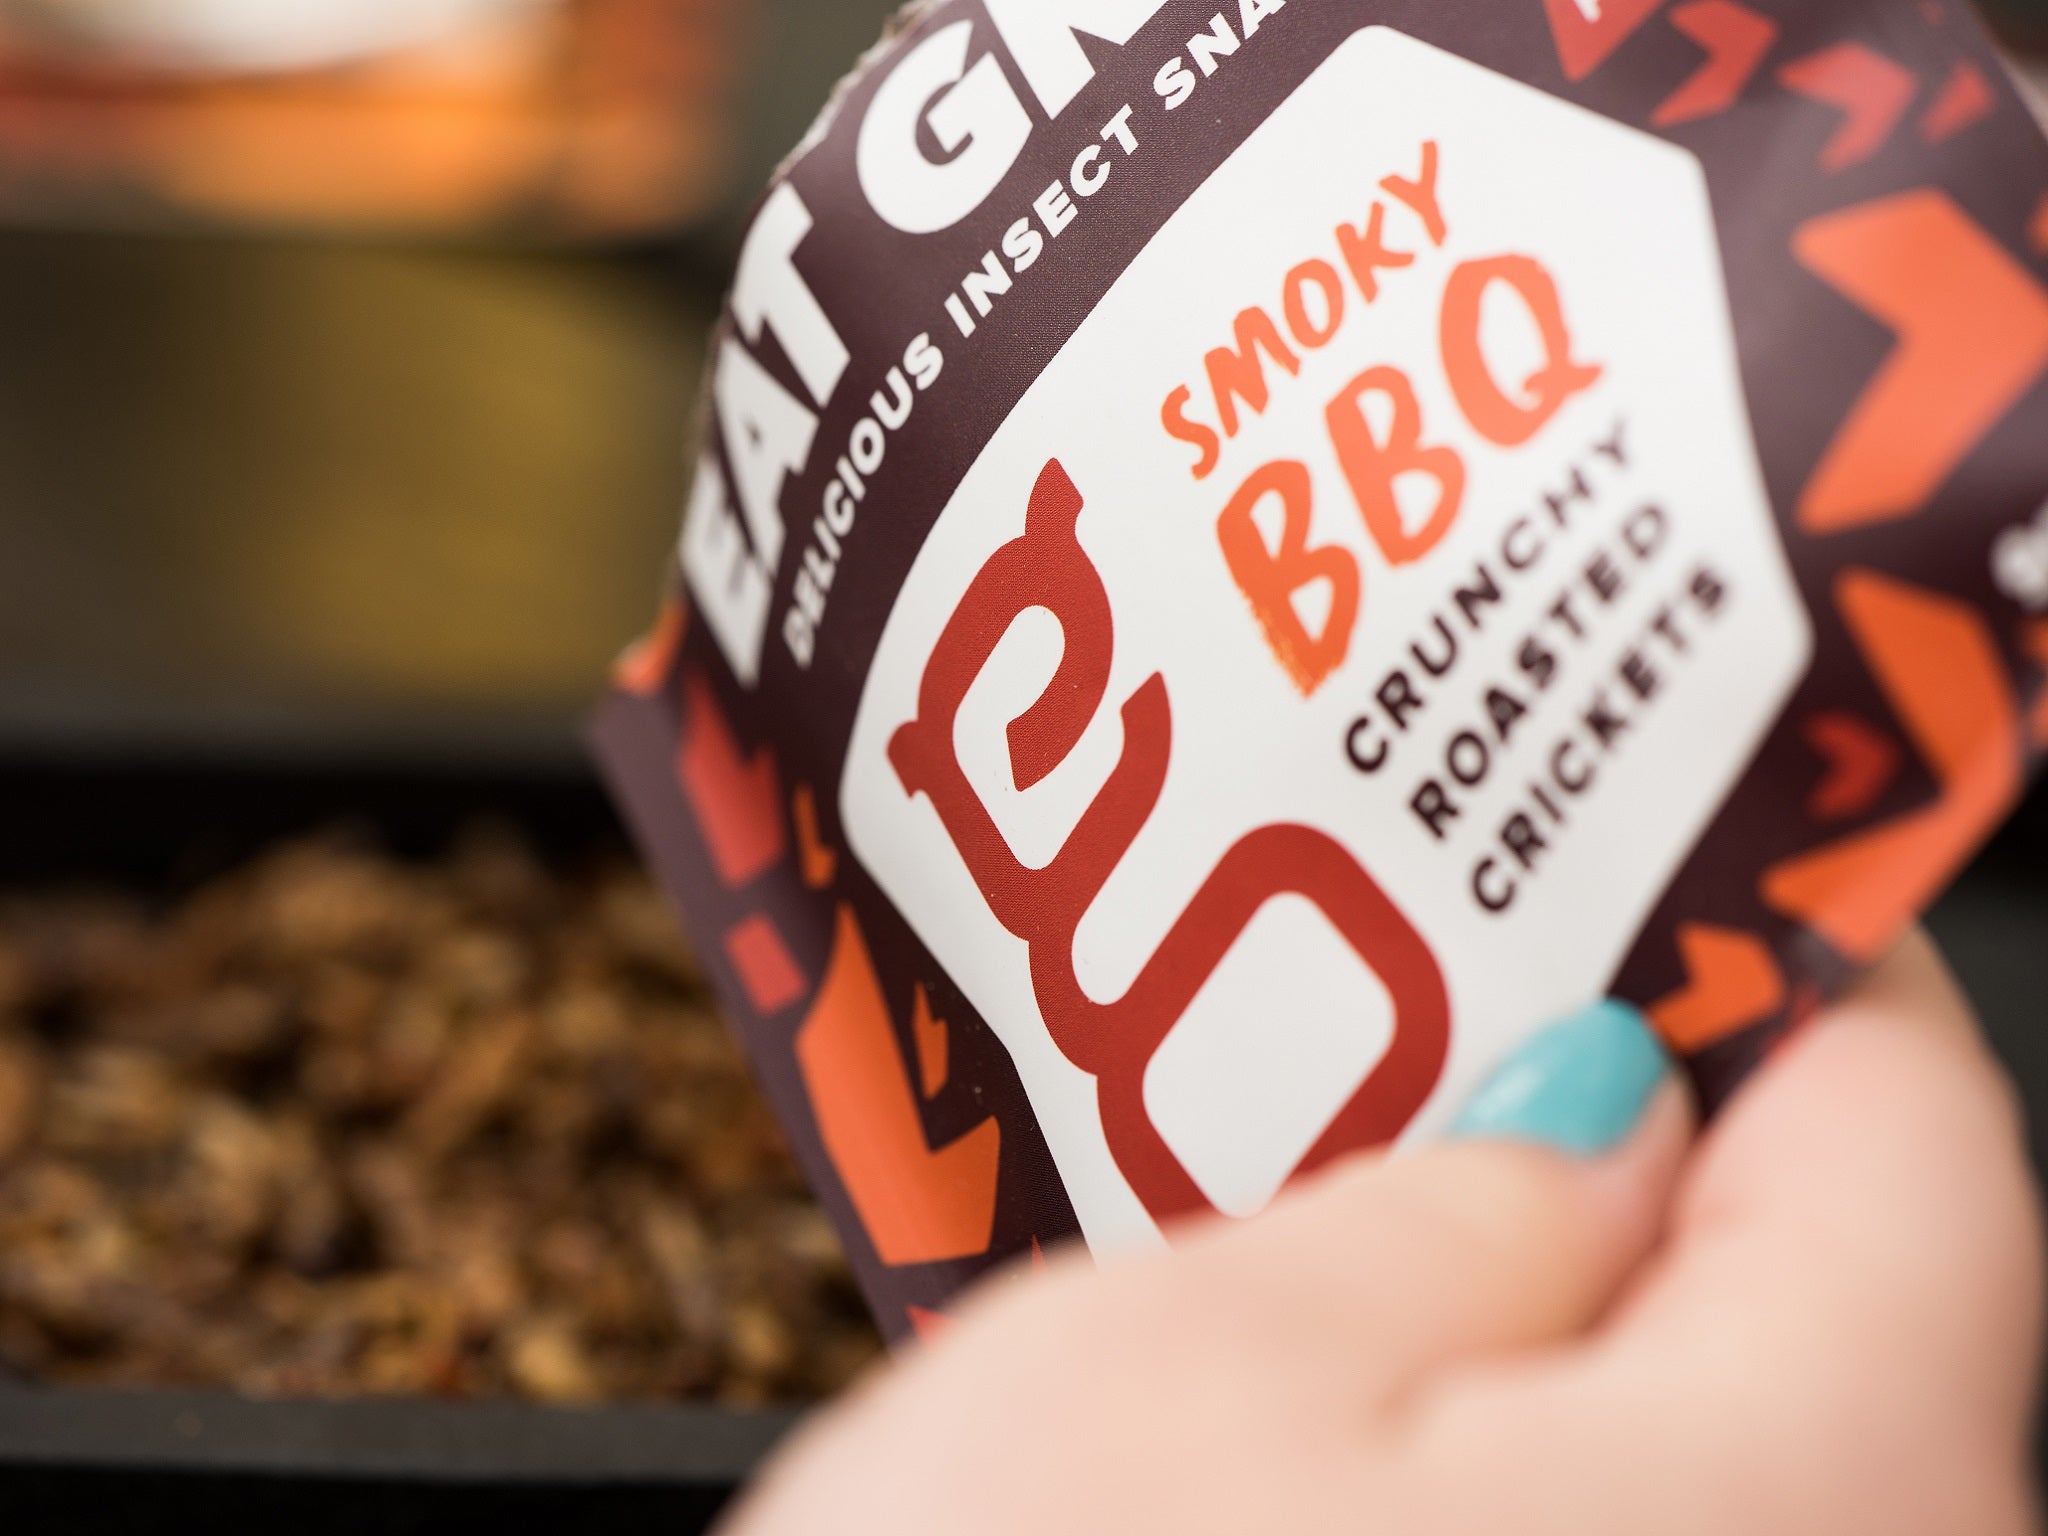 Crickets are the new 'new sustainable protein source' in Sainsbury's